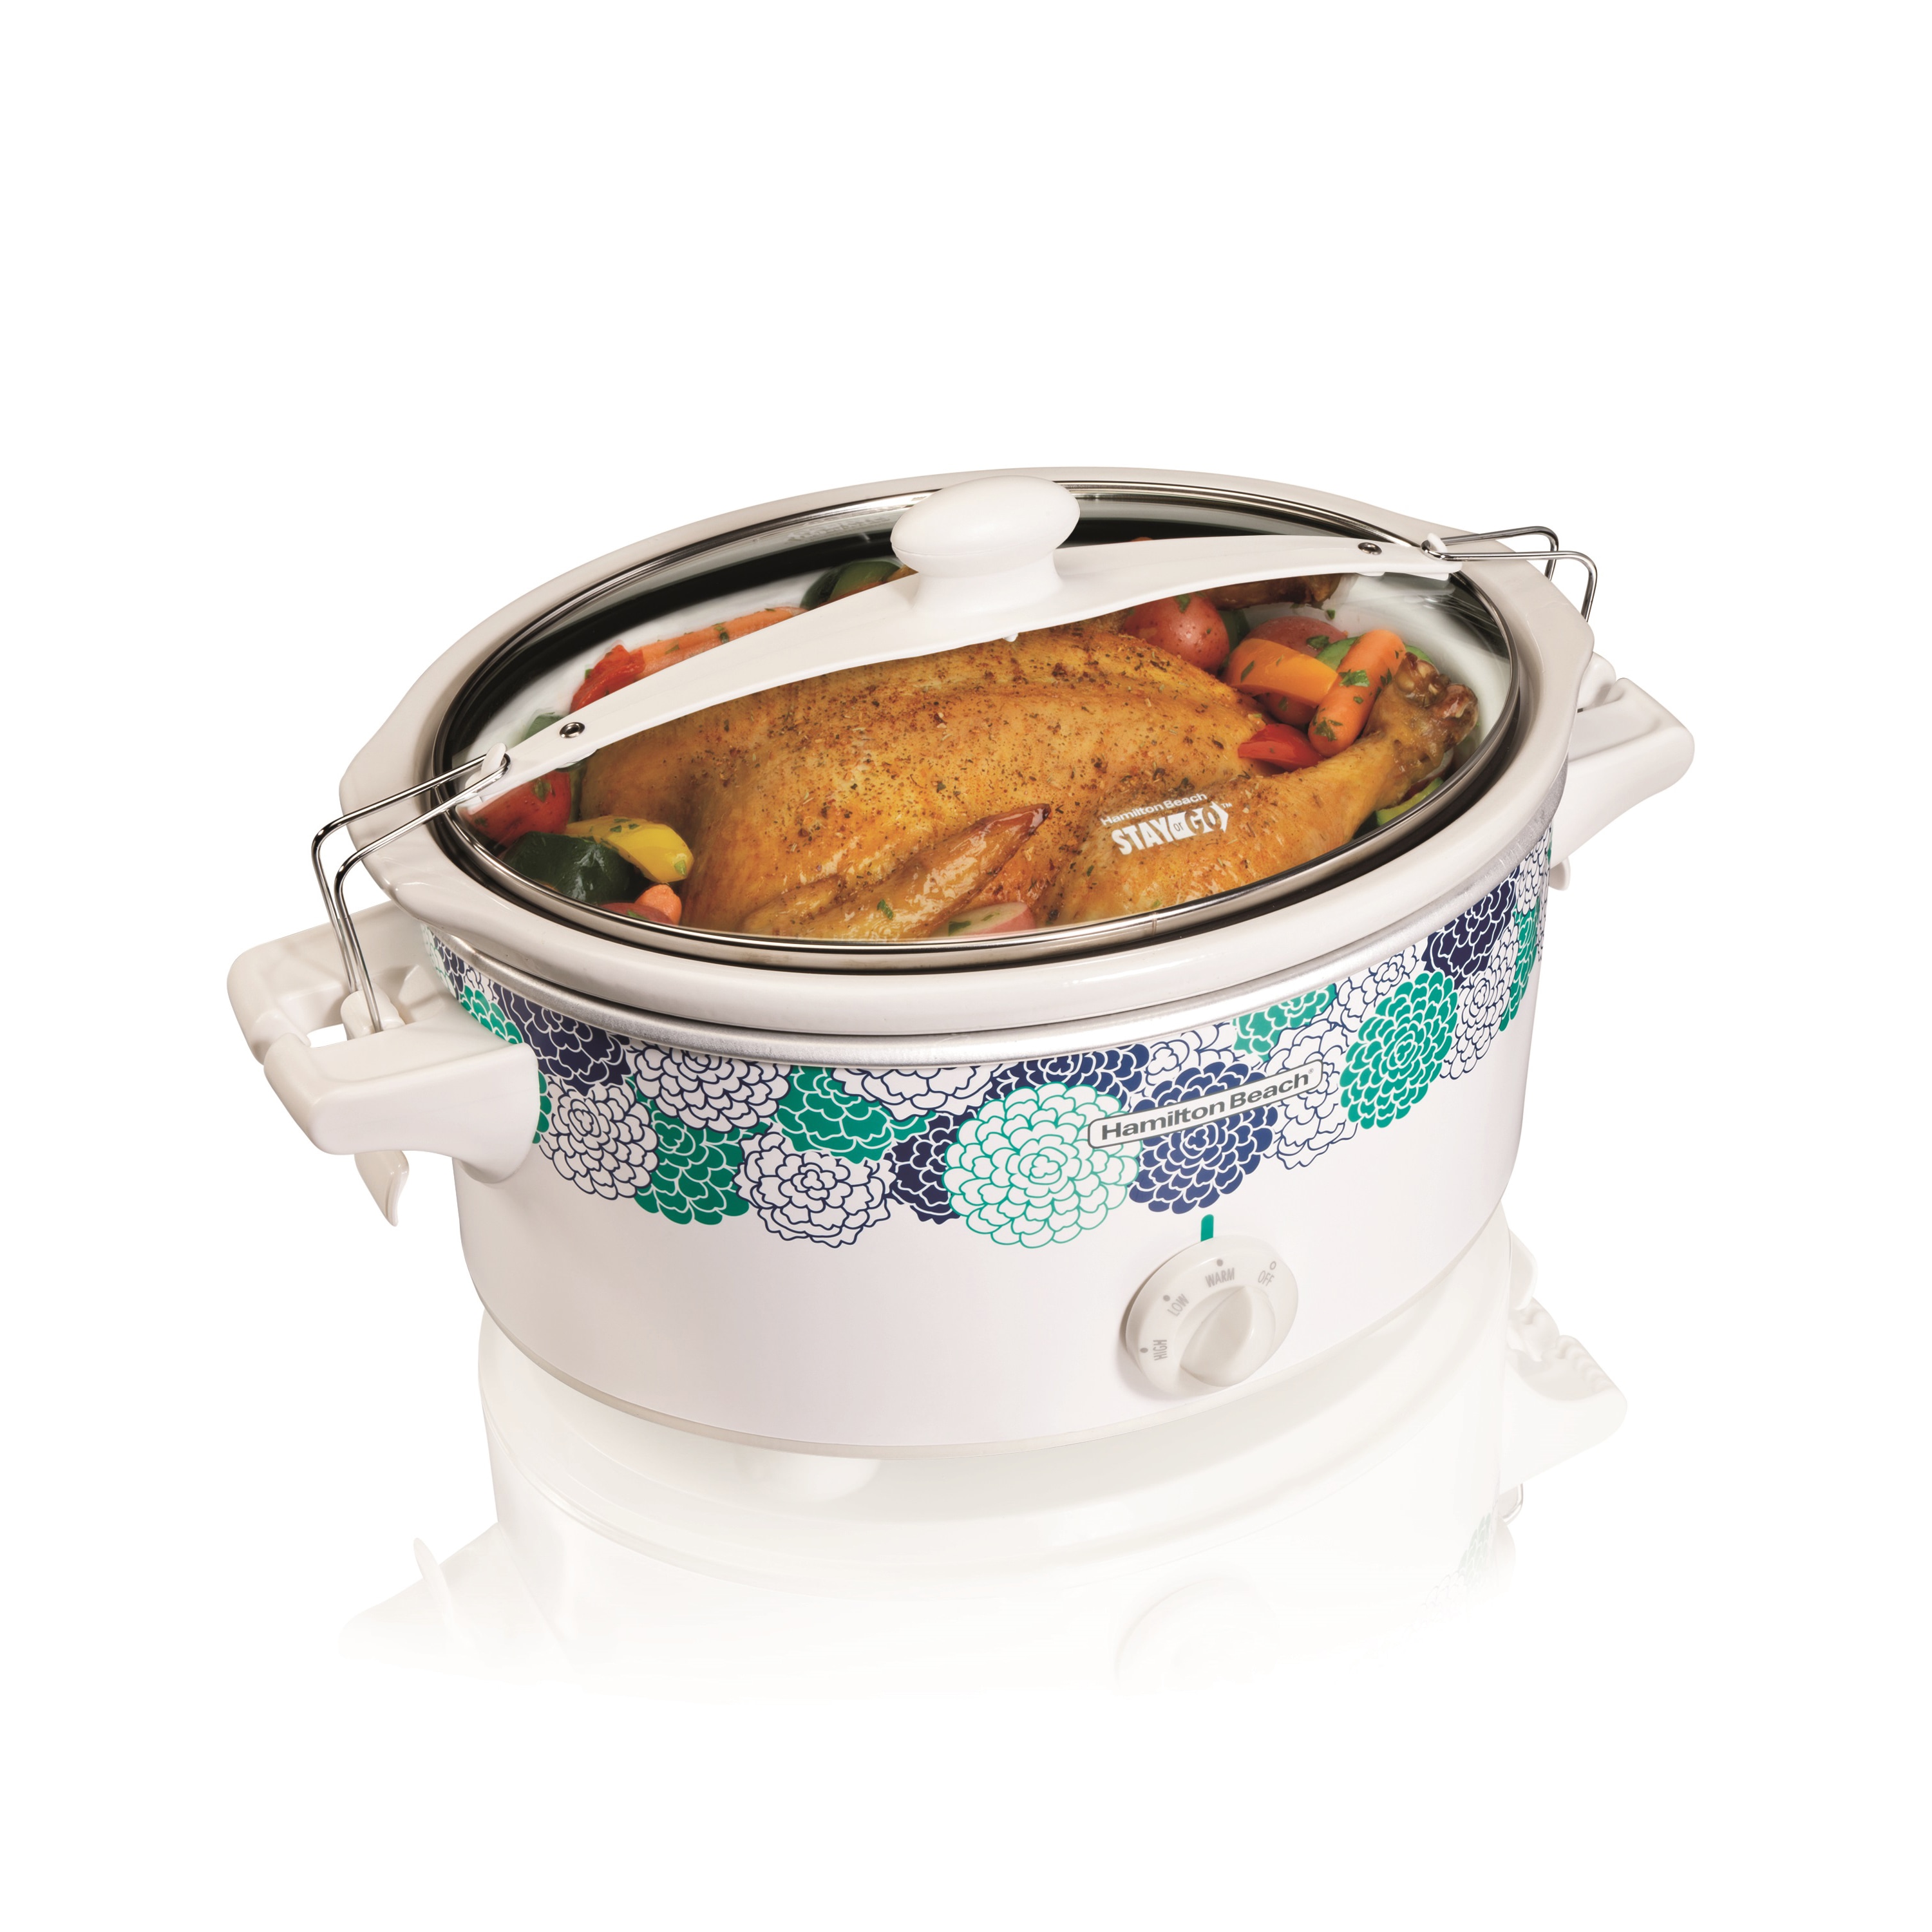 https://ak1.ostkcdn.com/images/products/8250942/STAY-OR-GO-6QUART-OVAL-SLOW-APPLCOOKER-WITH-LID-CLIPS-GASKET-86be254d-0394-44bc-b41f-0de688400477.jpg